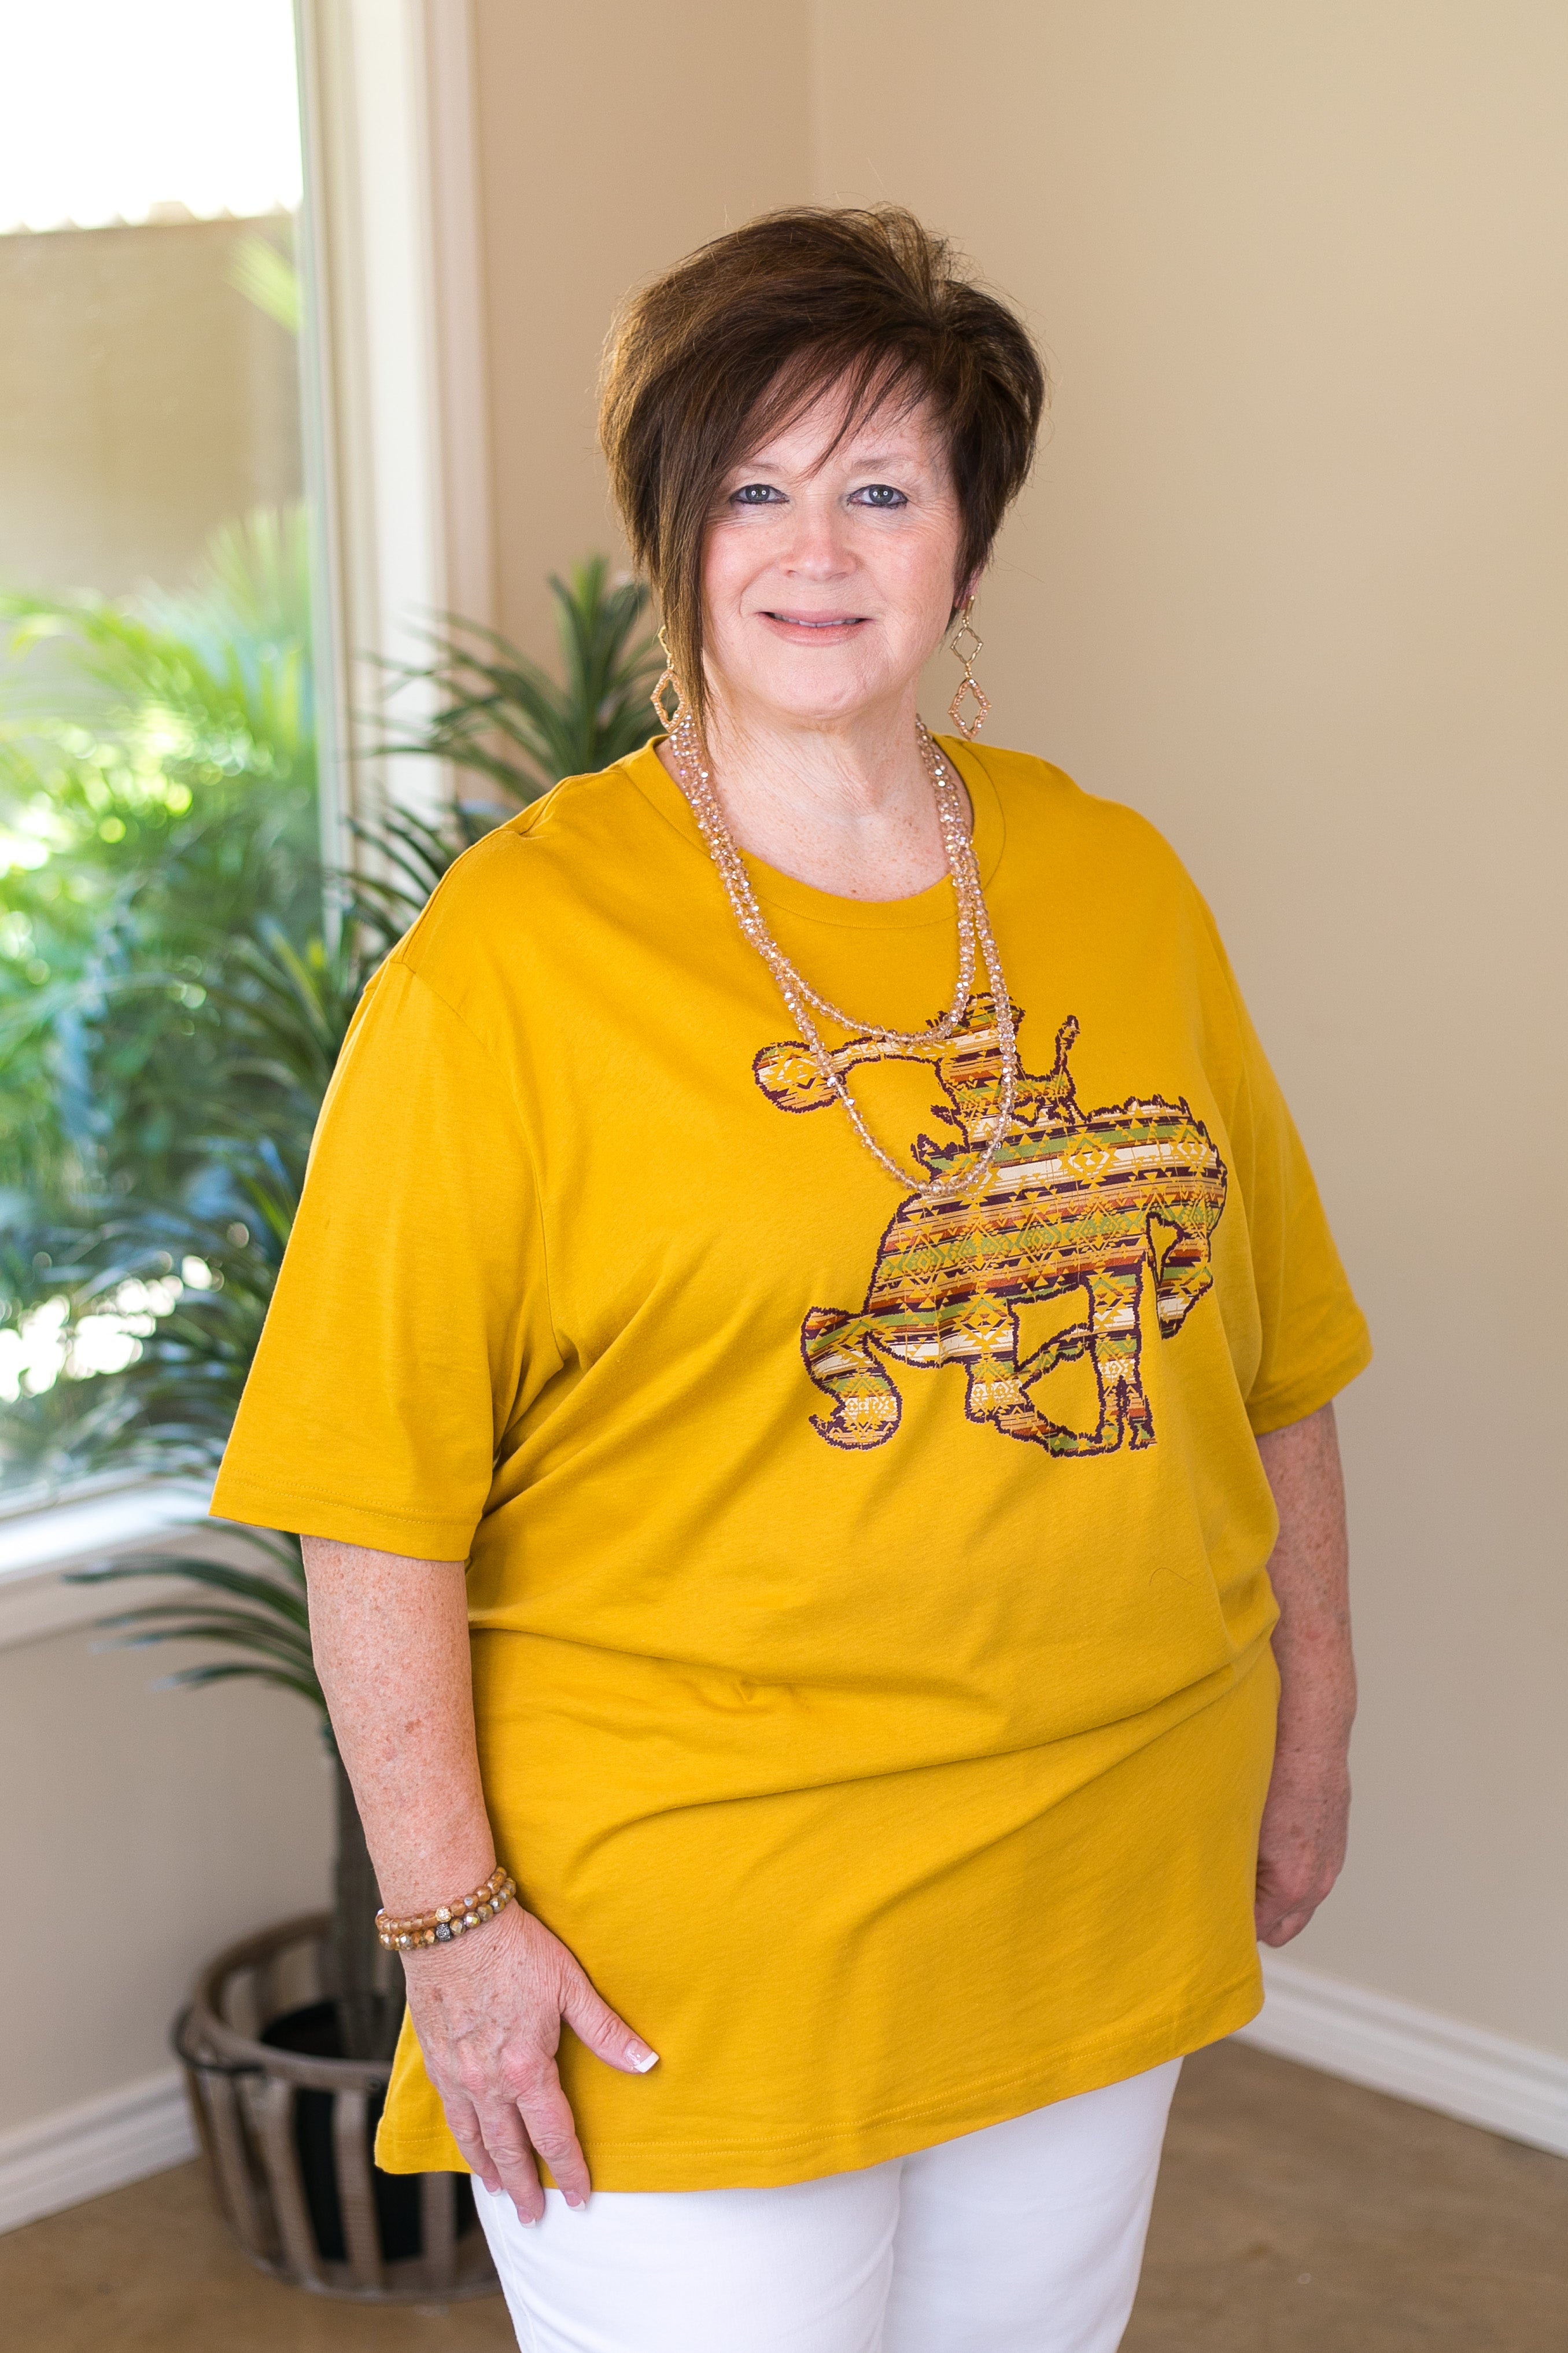 Ain't My First Rodeo Aztec Print Saddle Bronc Short Sleeve Tee Shirt in Mustard Yellow - Giddy Up Glamour Boutique